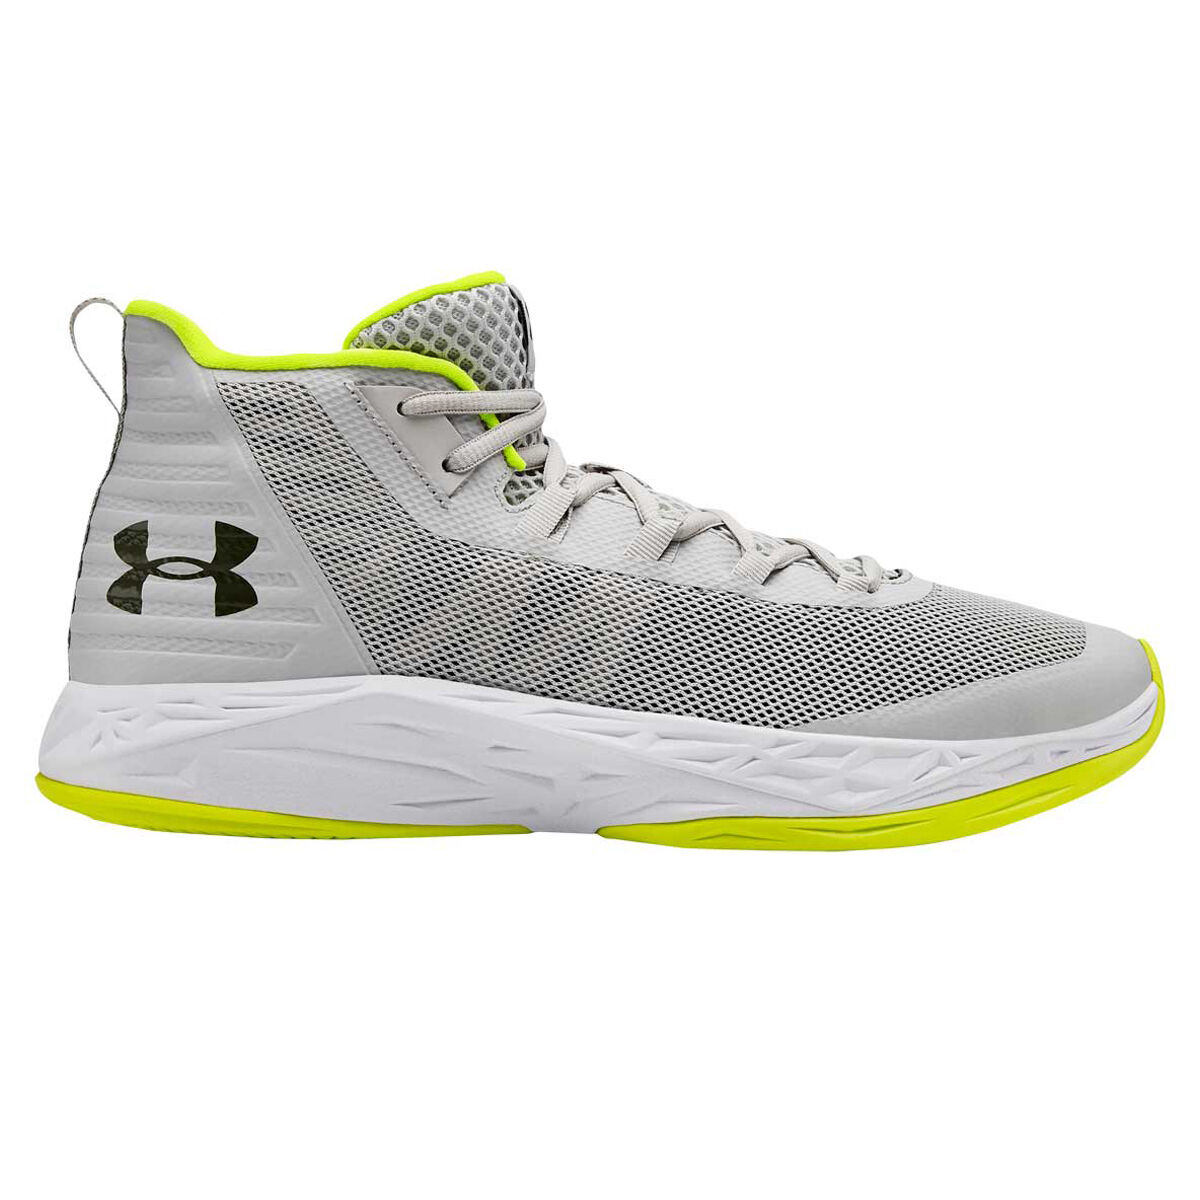 Under Armour Jet Mid Mens Basketball 